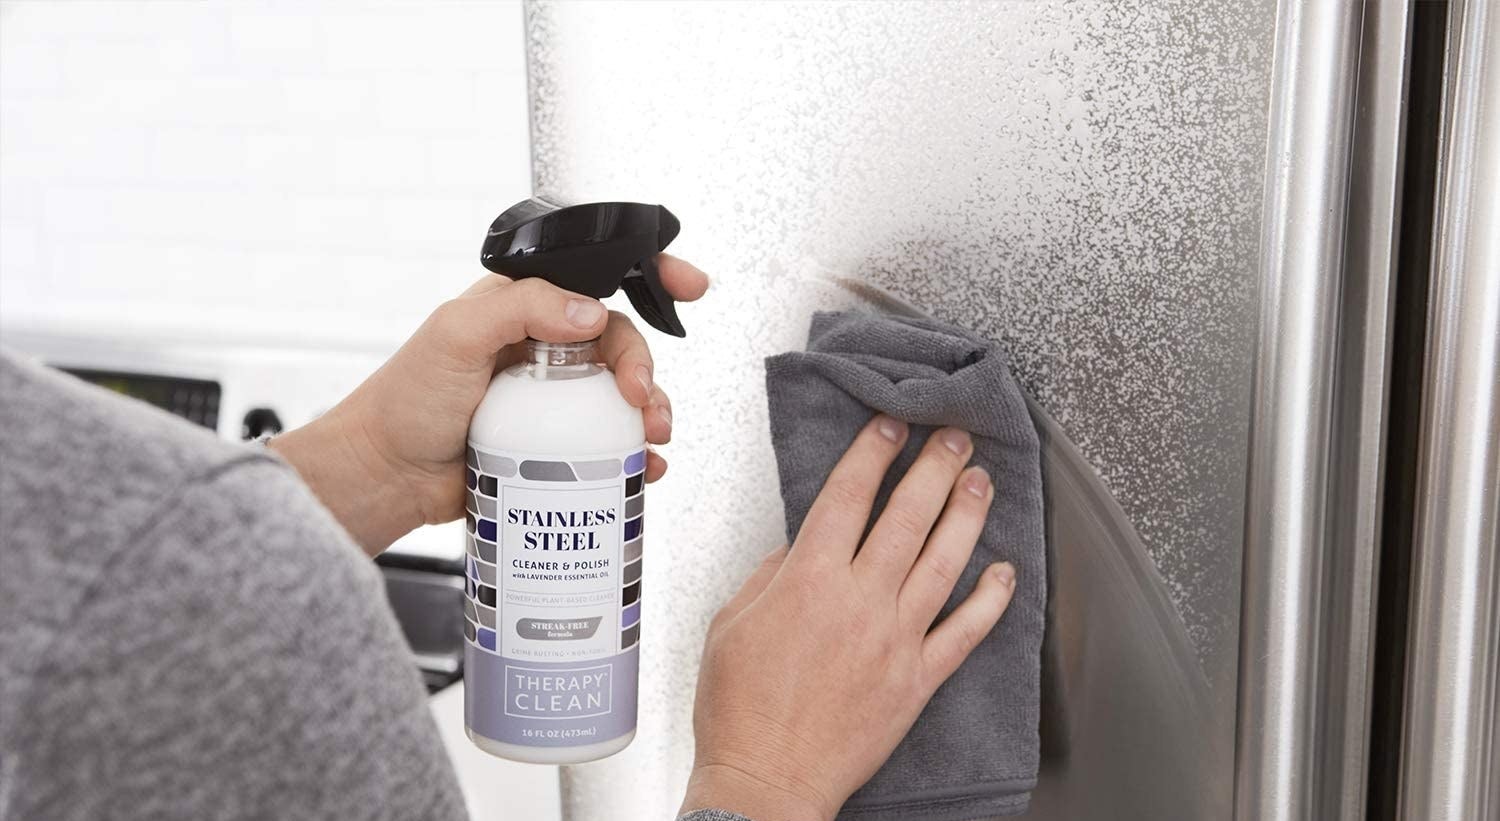 hands spray cleaner on the fridge then wipe it away with cloth